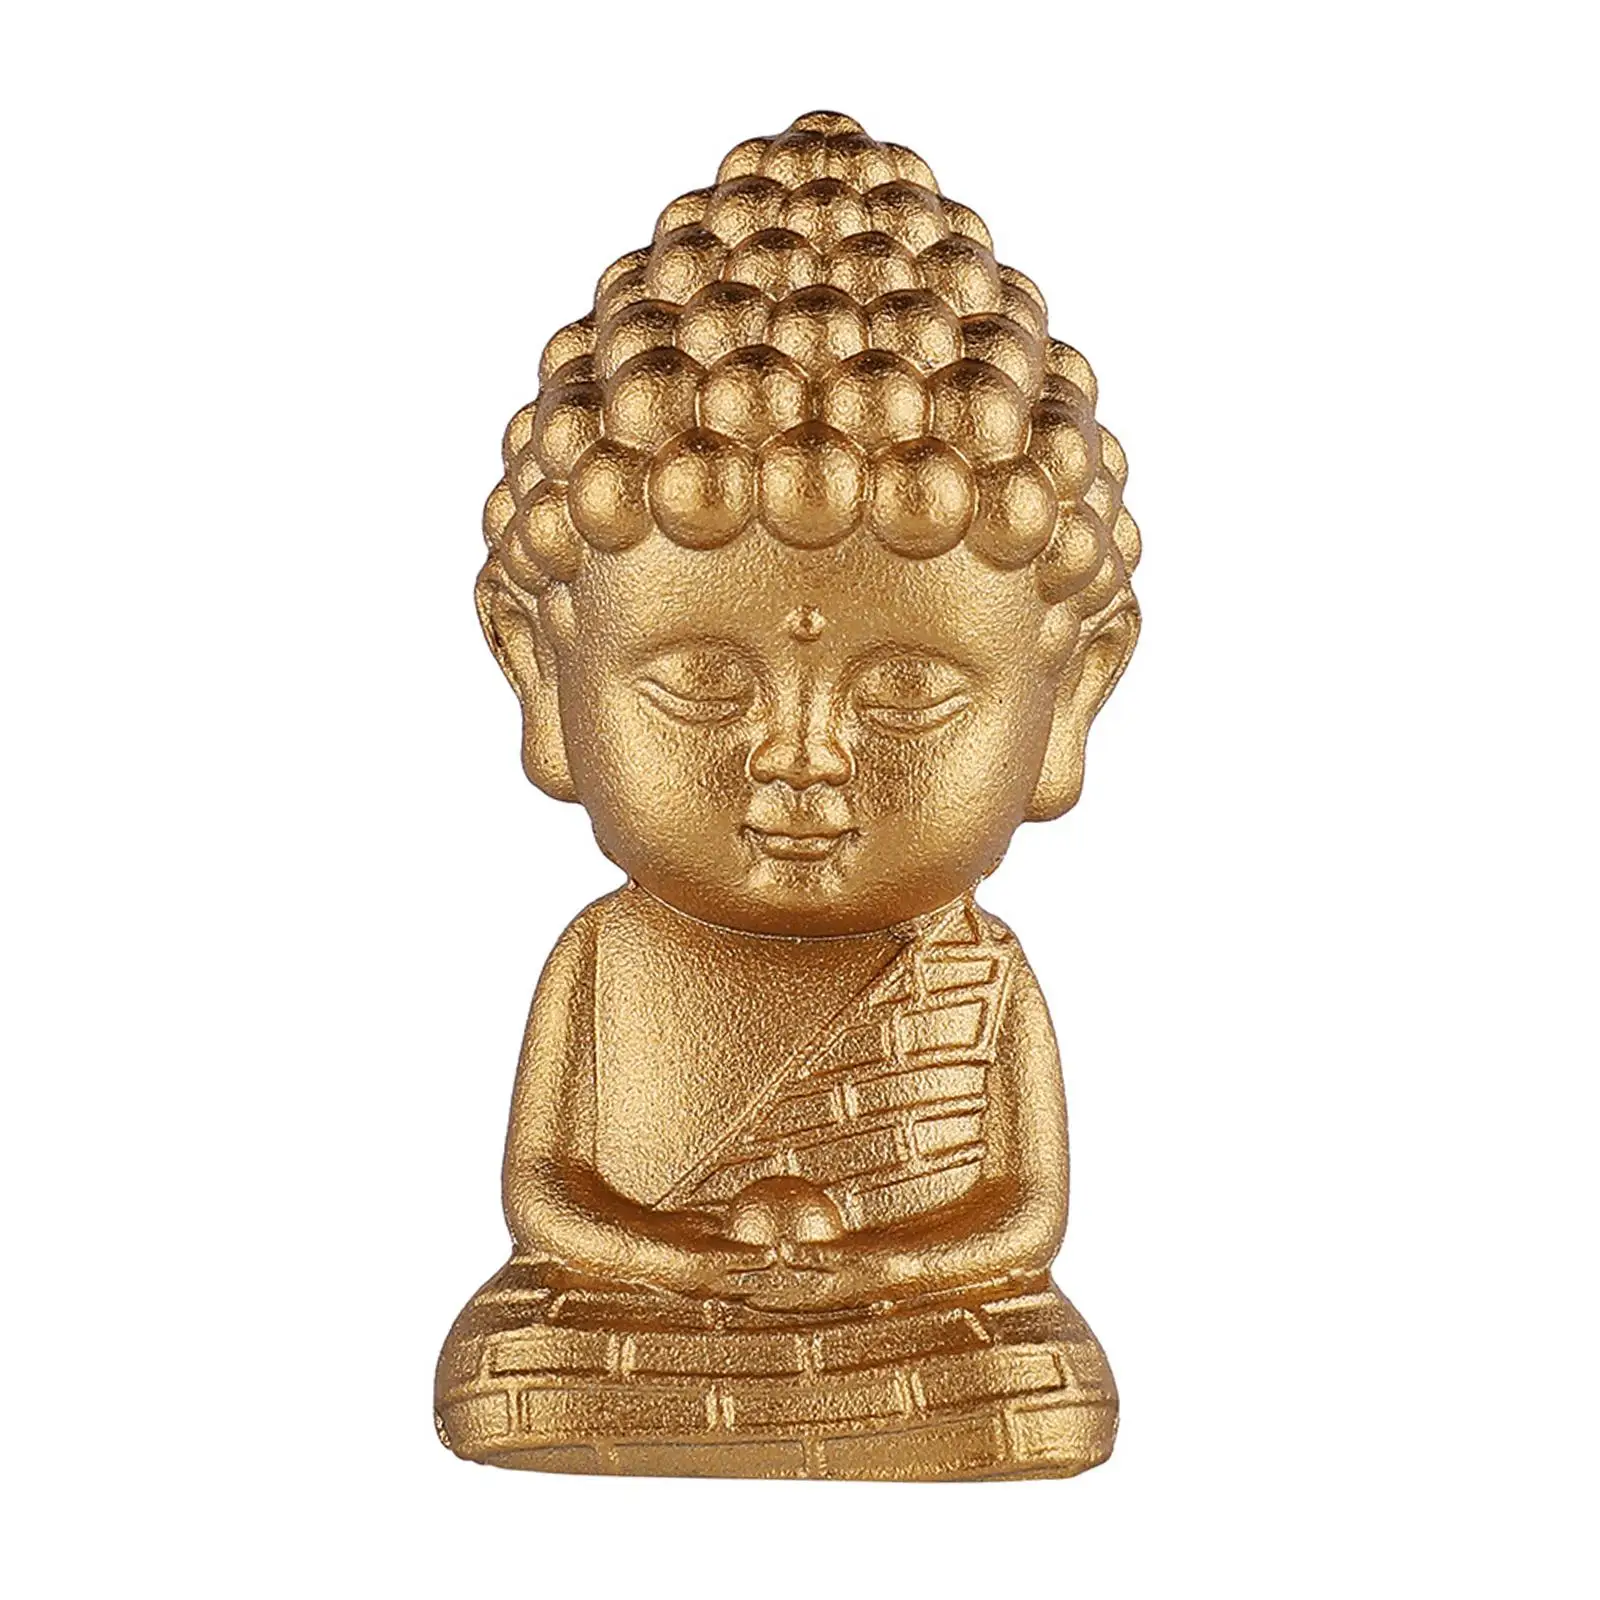 Miniature Buddha Statue Scene Layout Props Sculpture for Office Study Home Housewarming